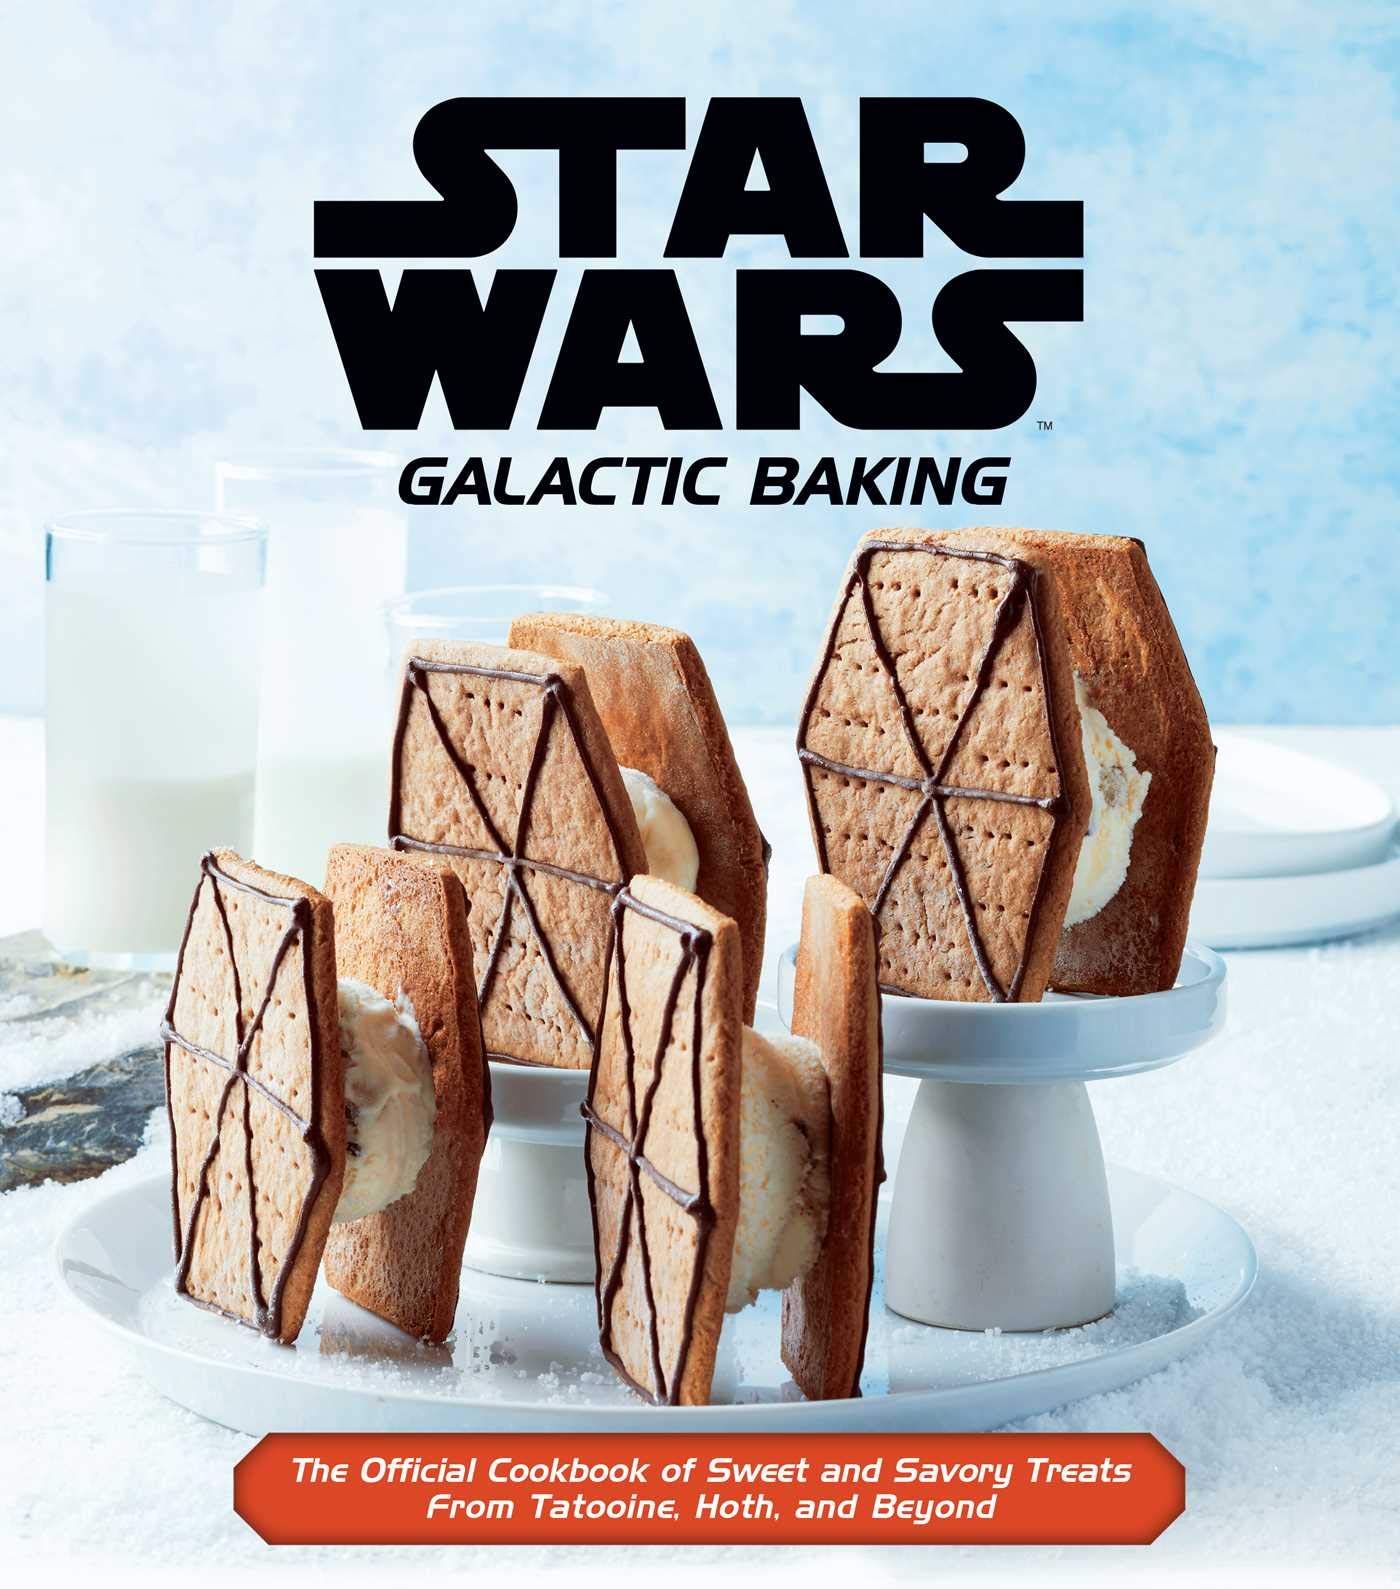 Star Wars Galactic Baking : The Official Cookbook of Sweet and Savory Treats from Tatooine, Hoth, and Beyond [Hardcover] หนังสือใหม่ พร้อมส่ง